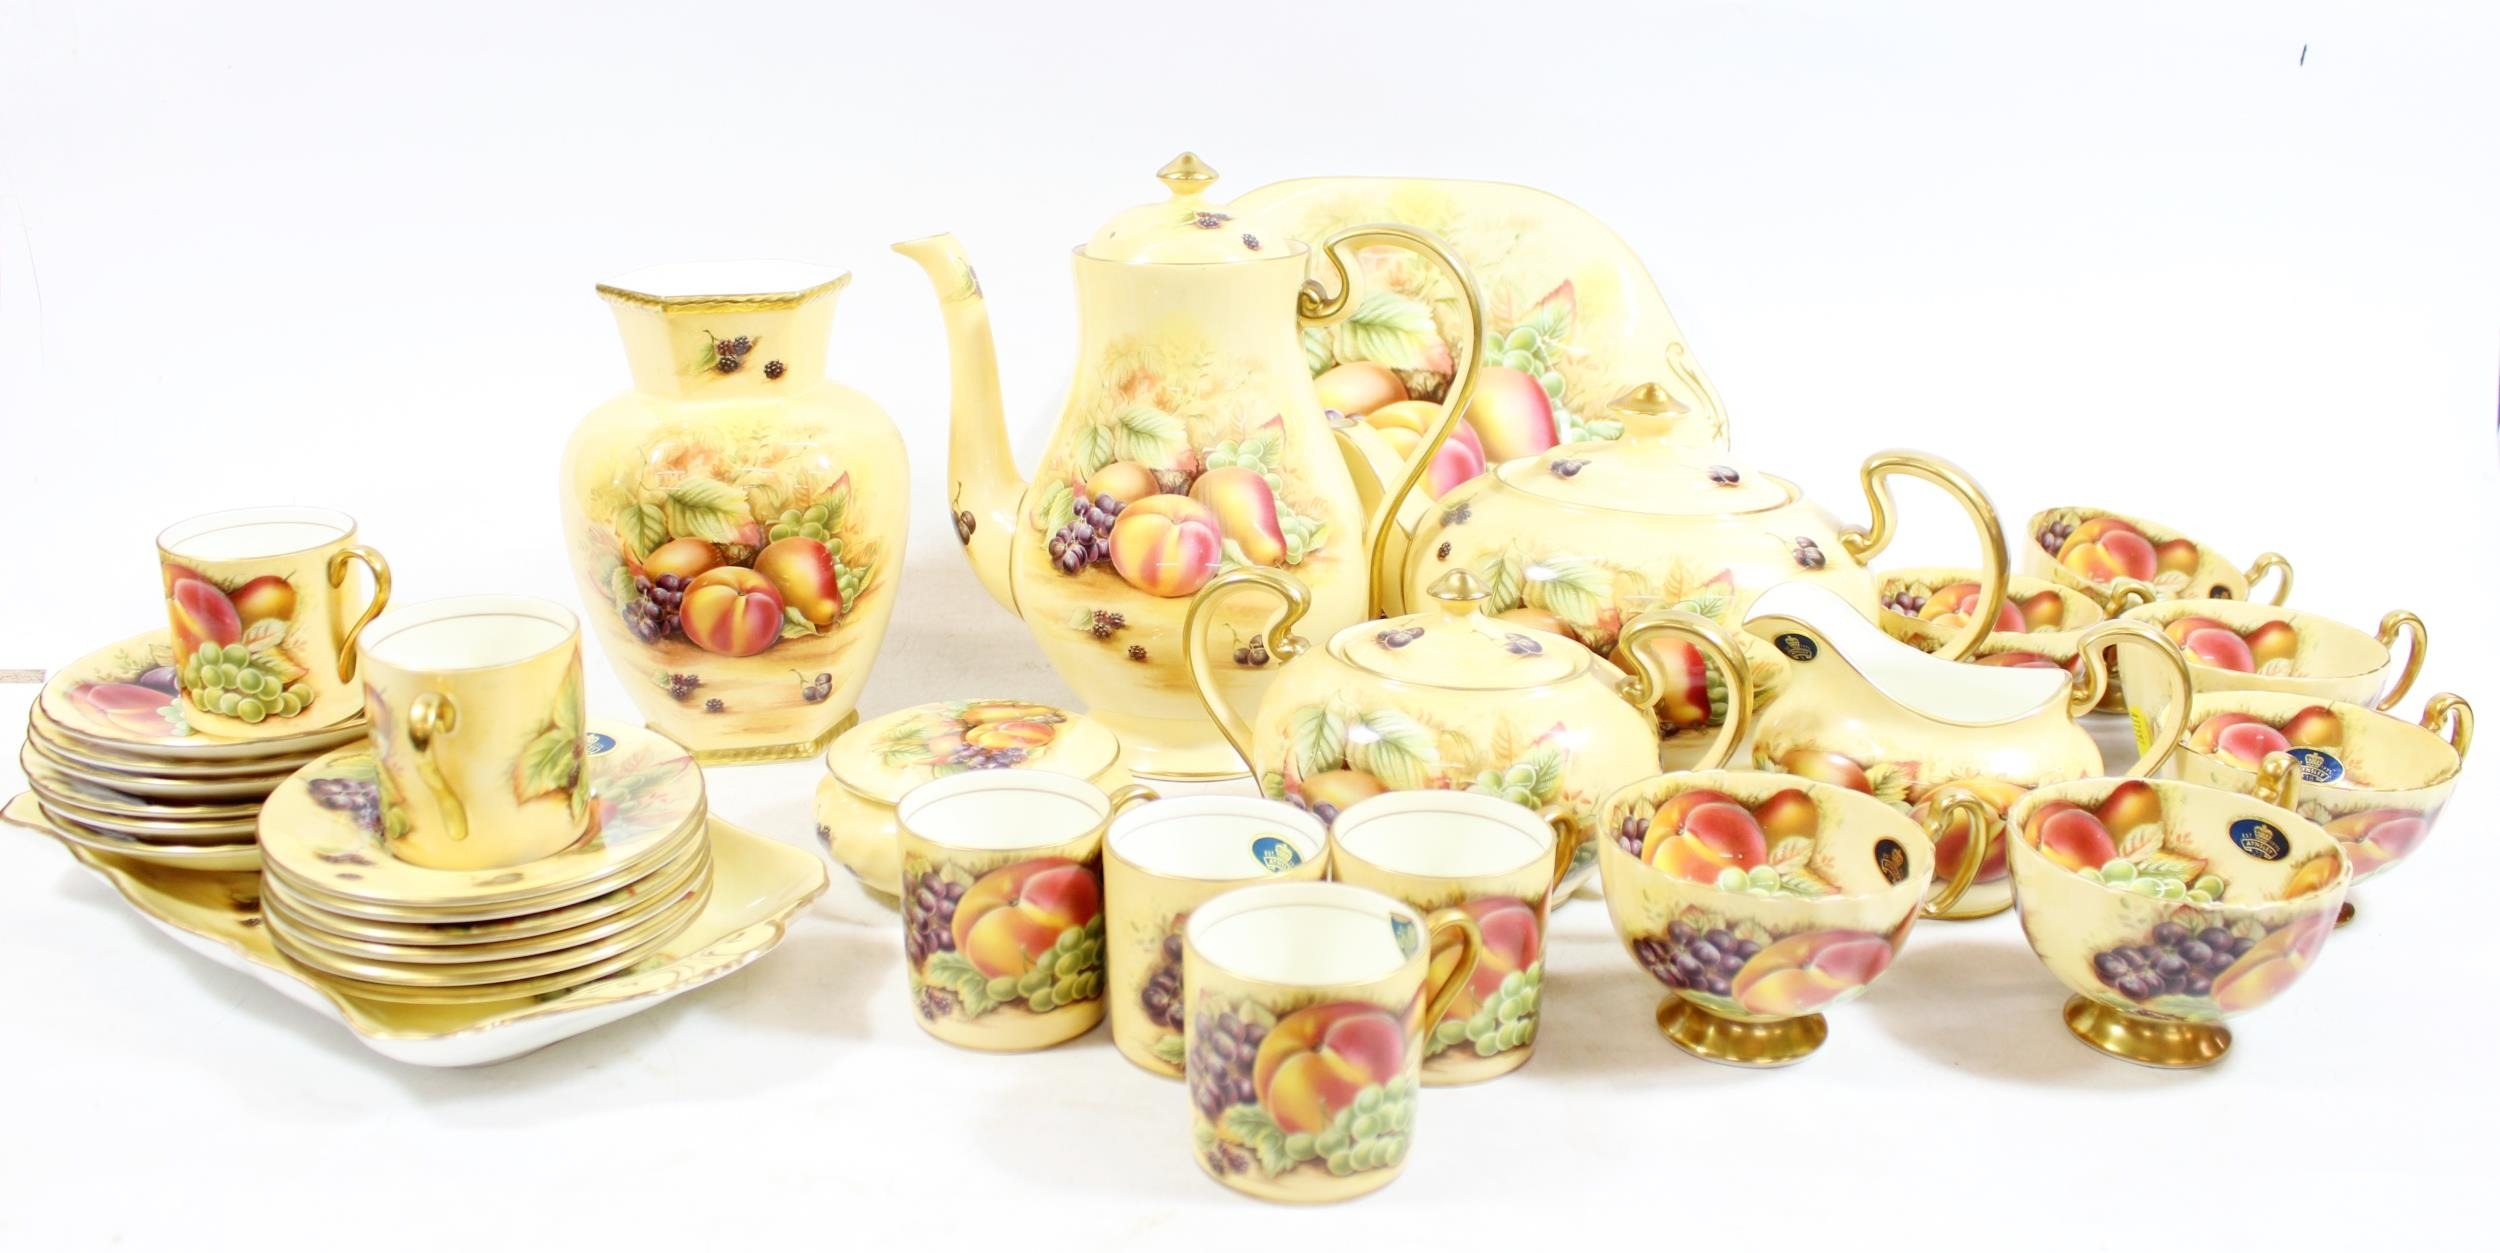 Aynsley Bone China Orchard Gold pattern tea and coffee service, consisting of six coffee cups and